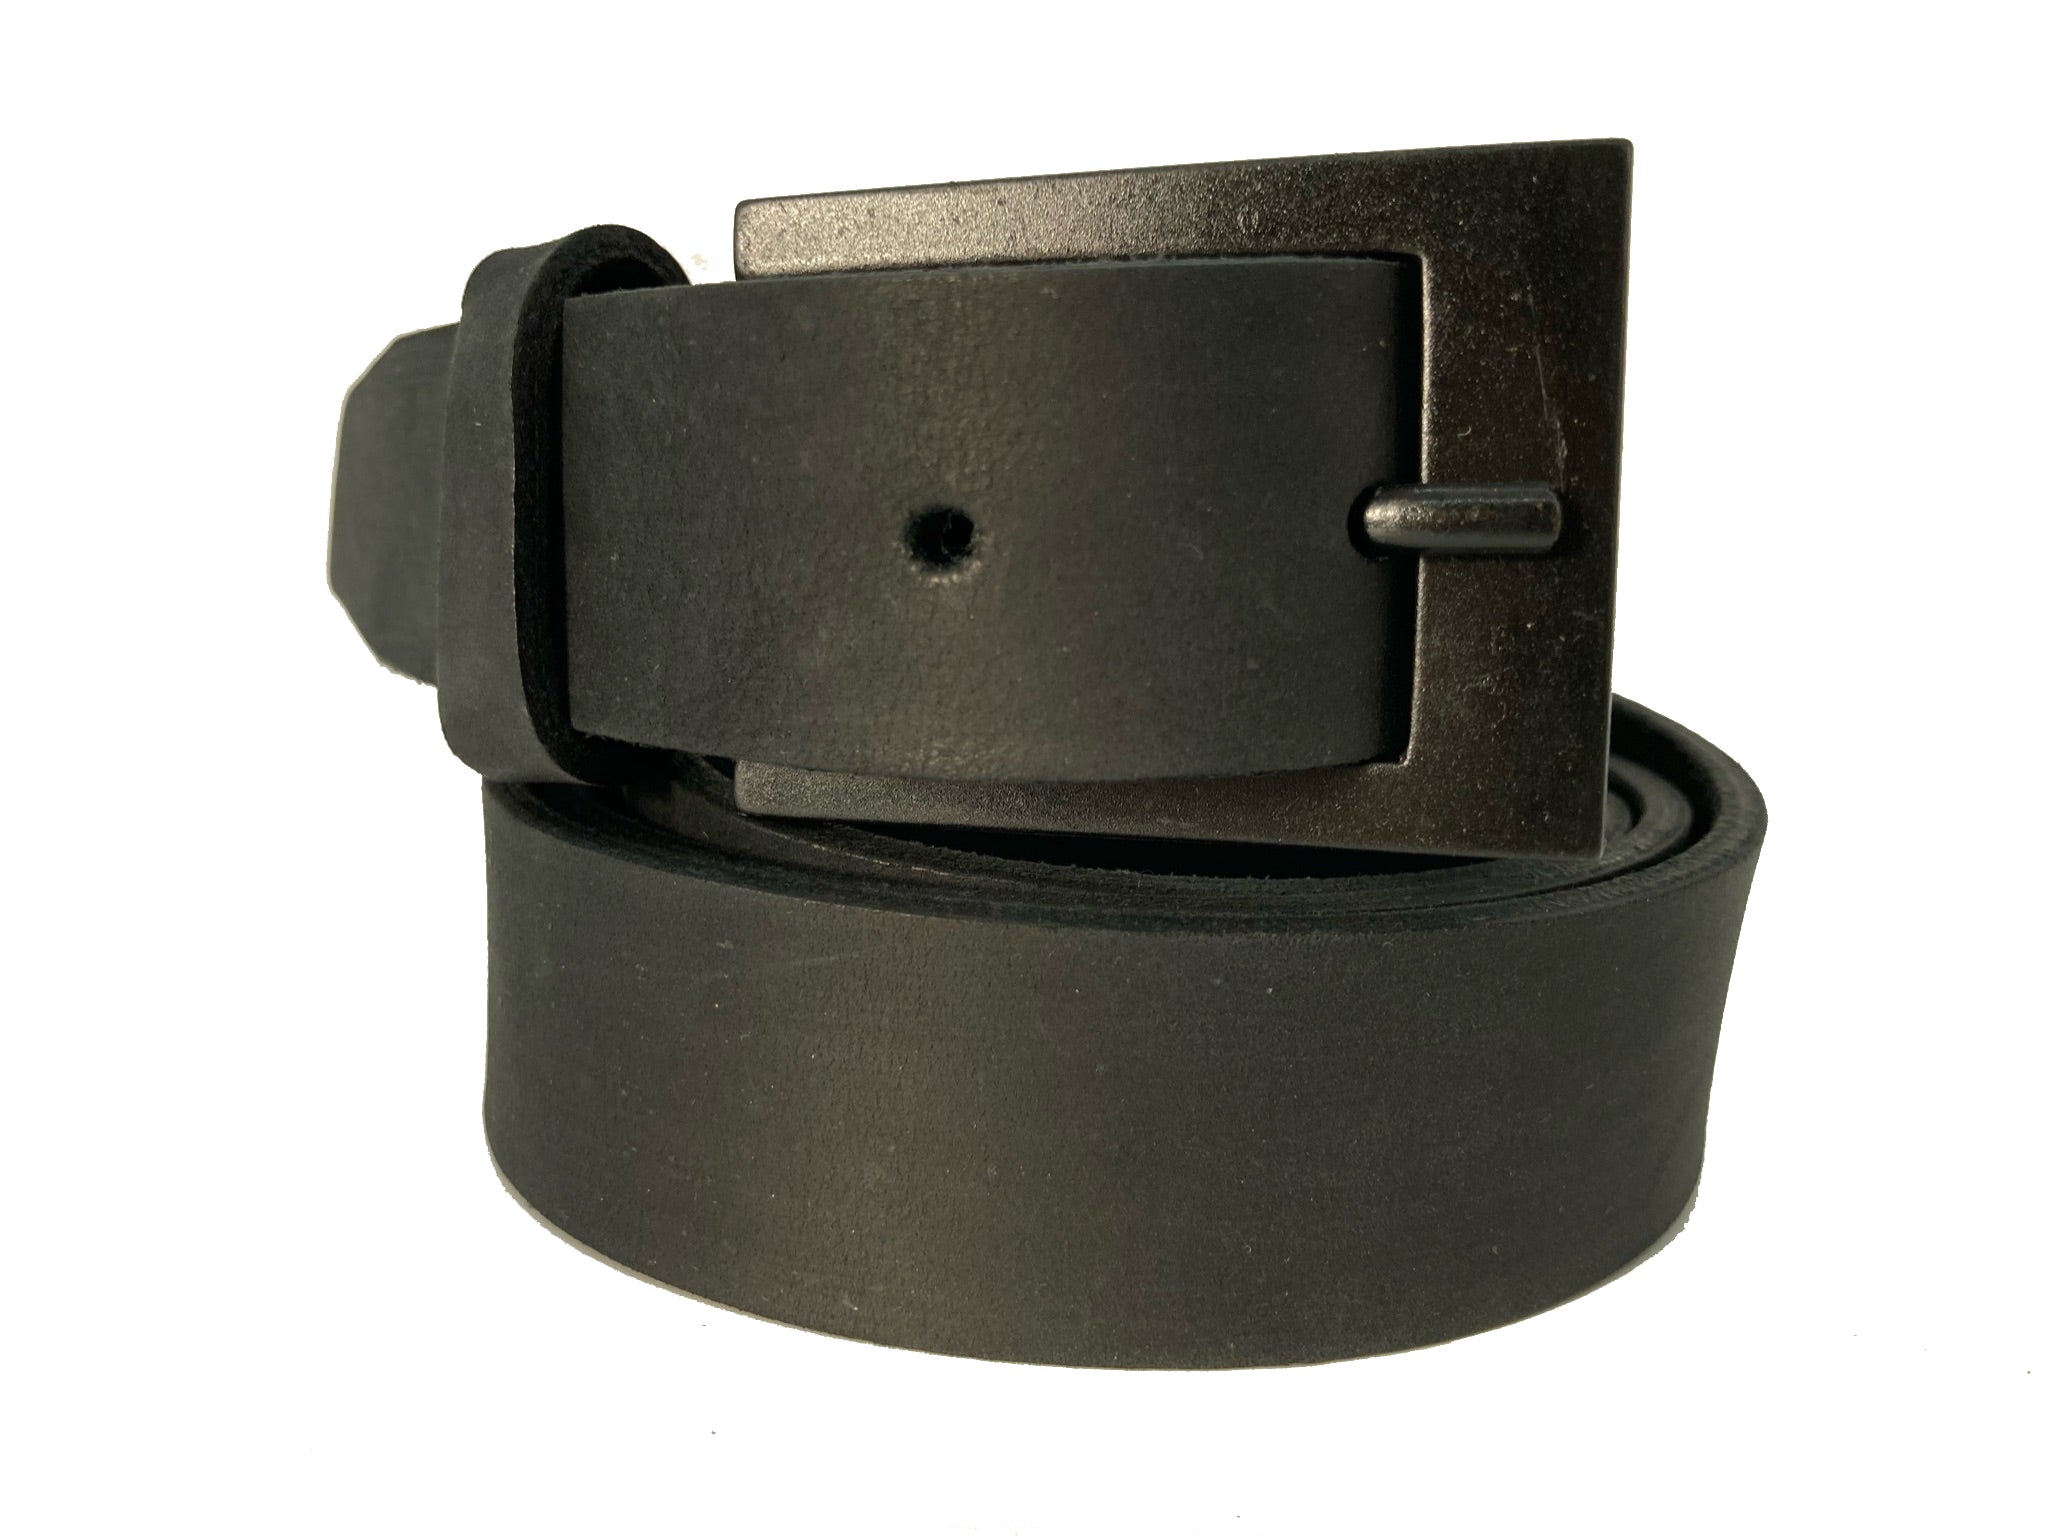 Handcrafted Suede Leather Belt - "UES Suede"